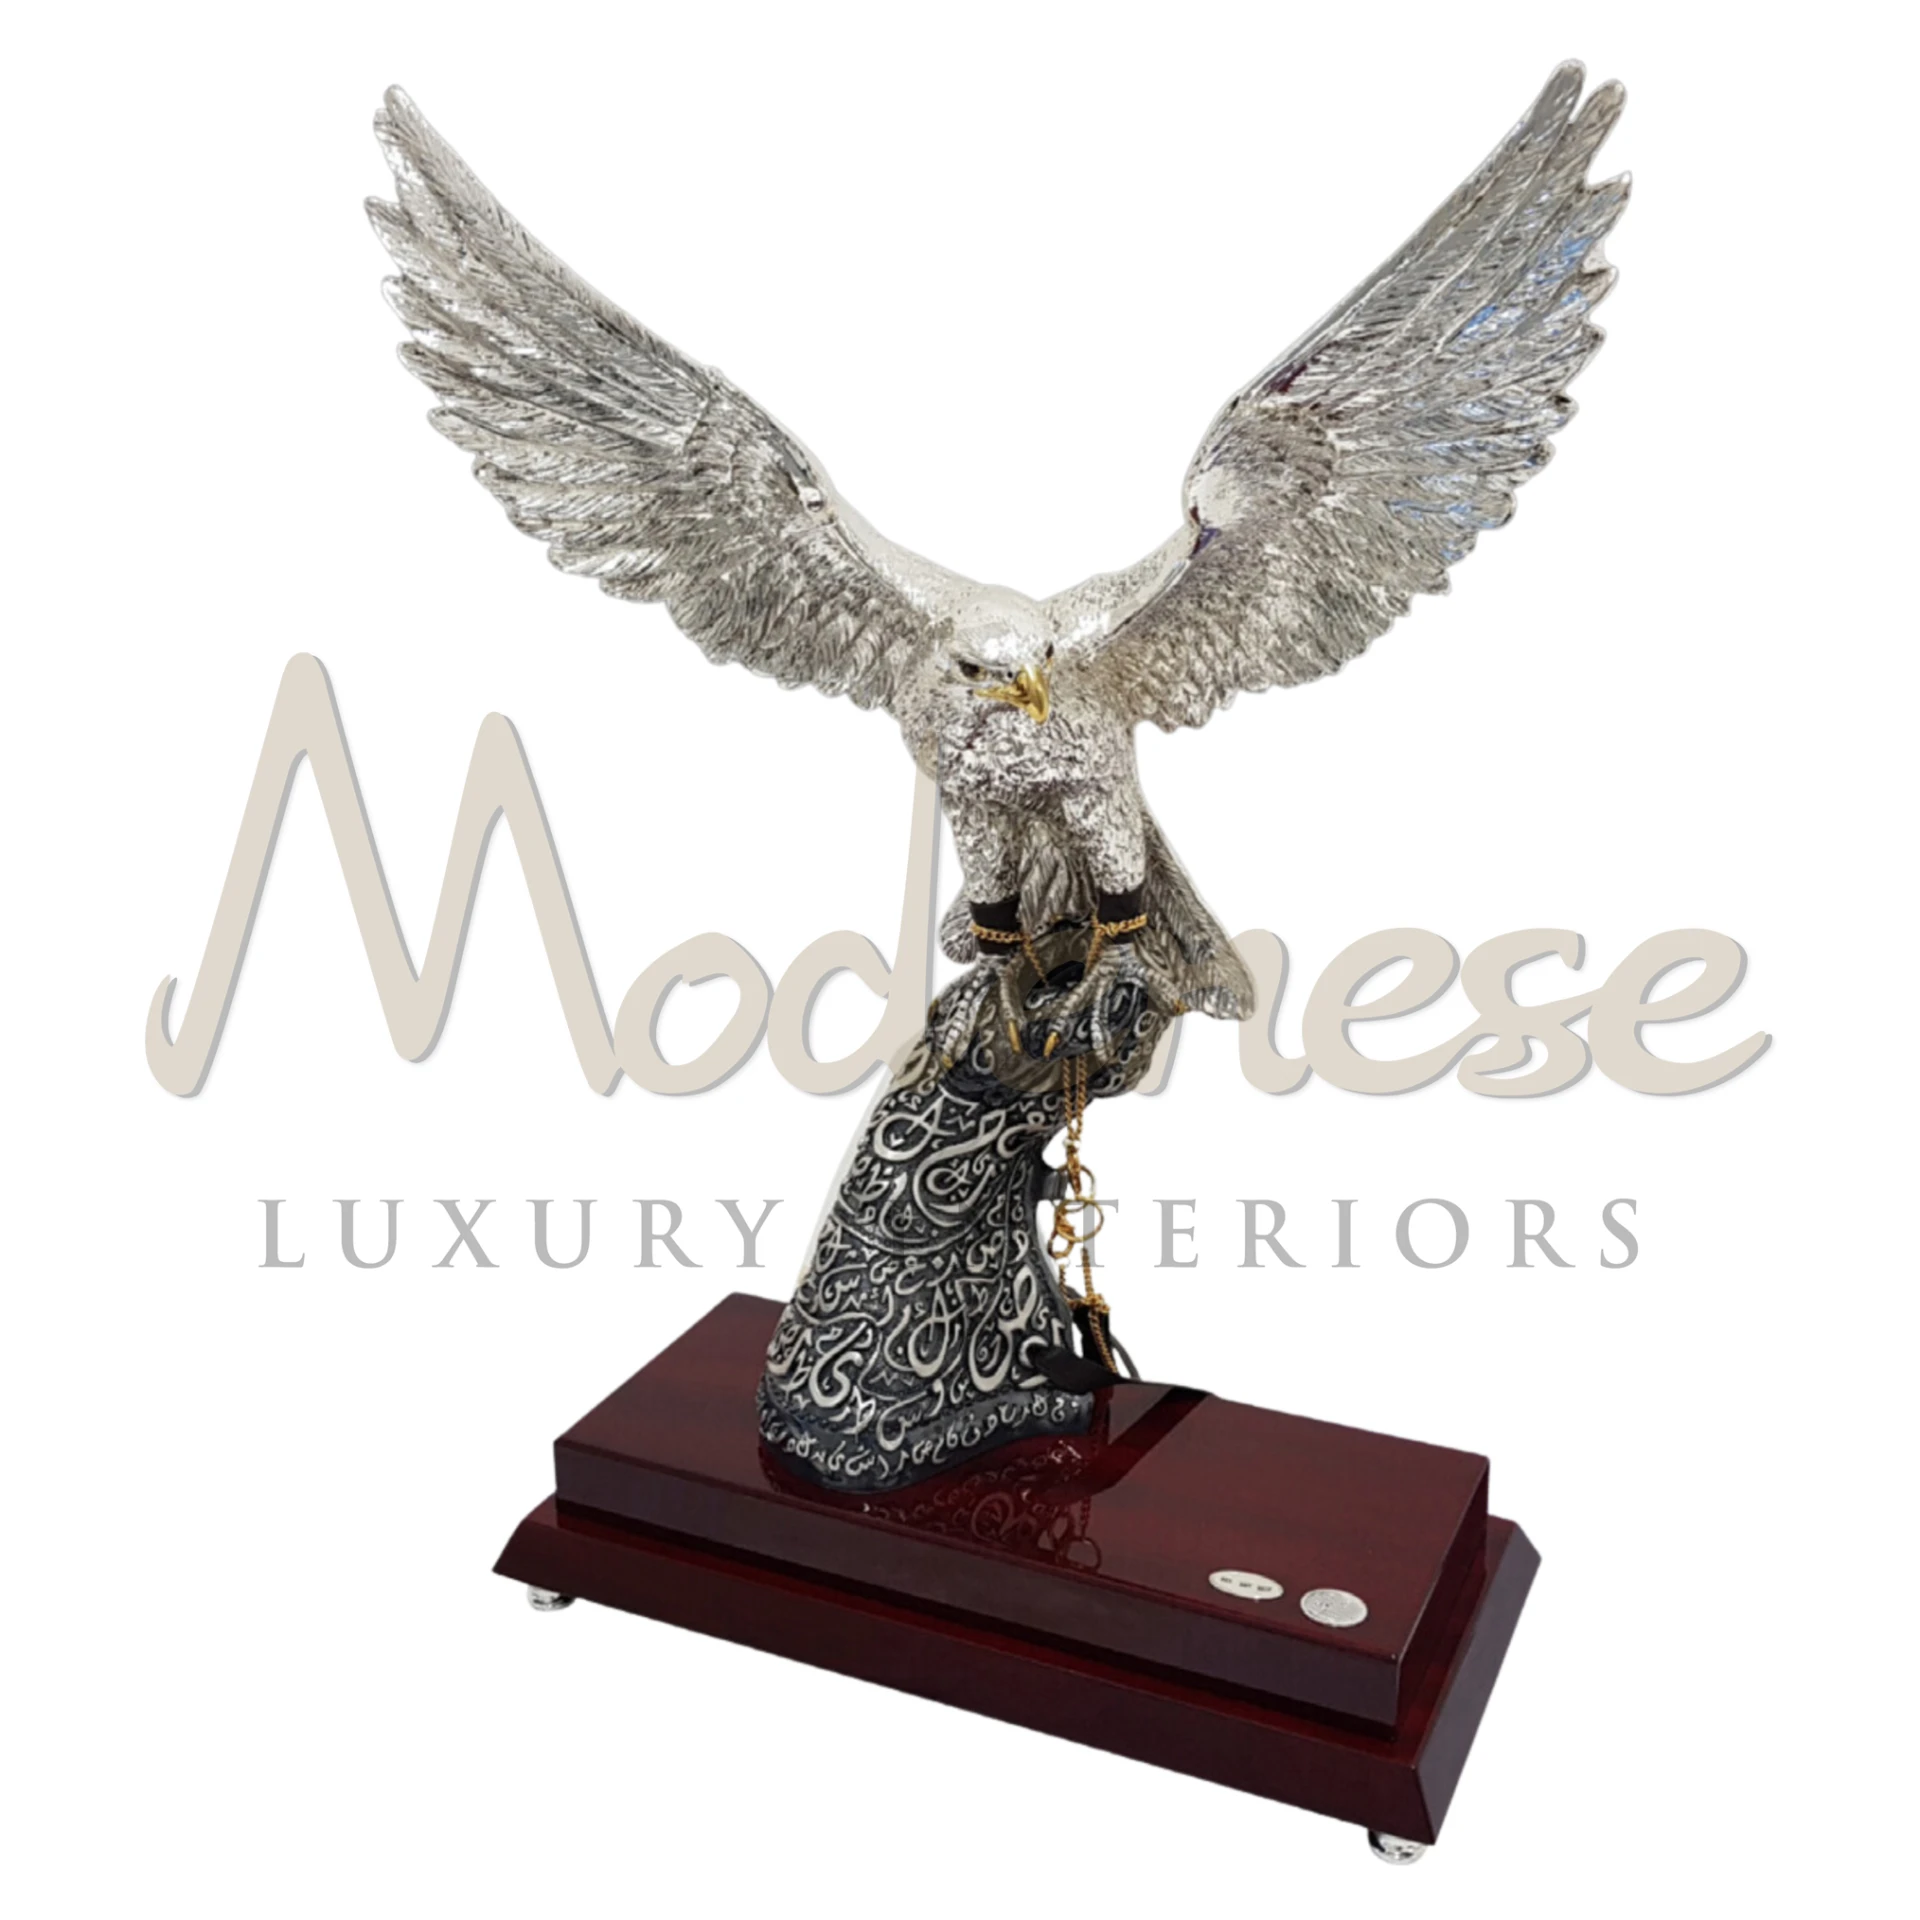 Stylish Silver Falcon statue, combining luxury and elegance with realistic or stylized designs, perfect for enhancing any interior décor theme.






